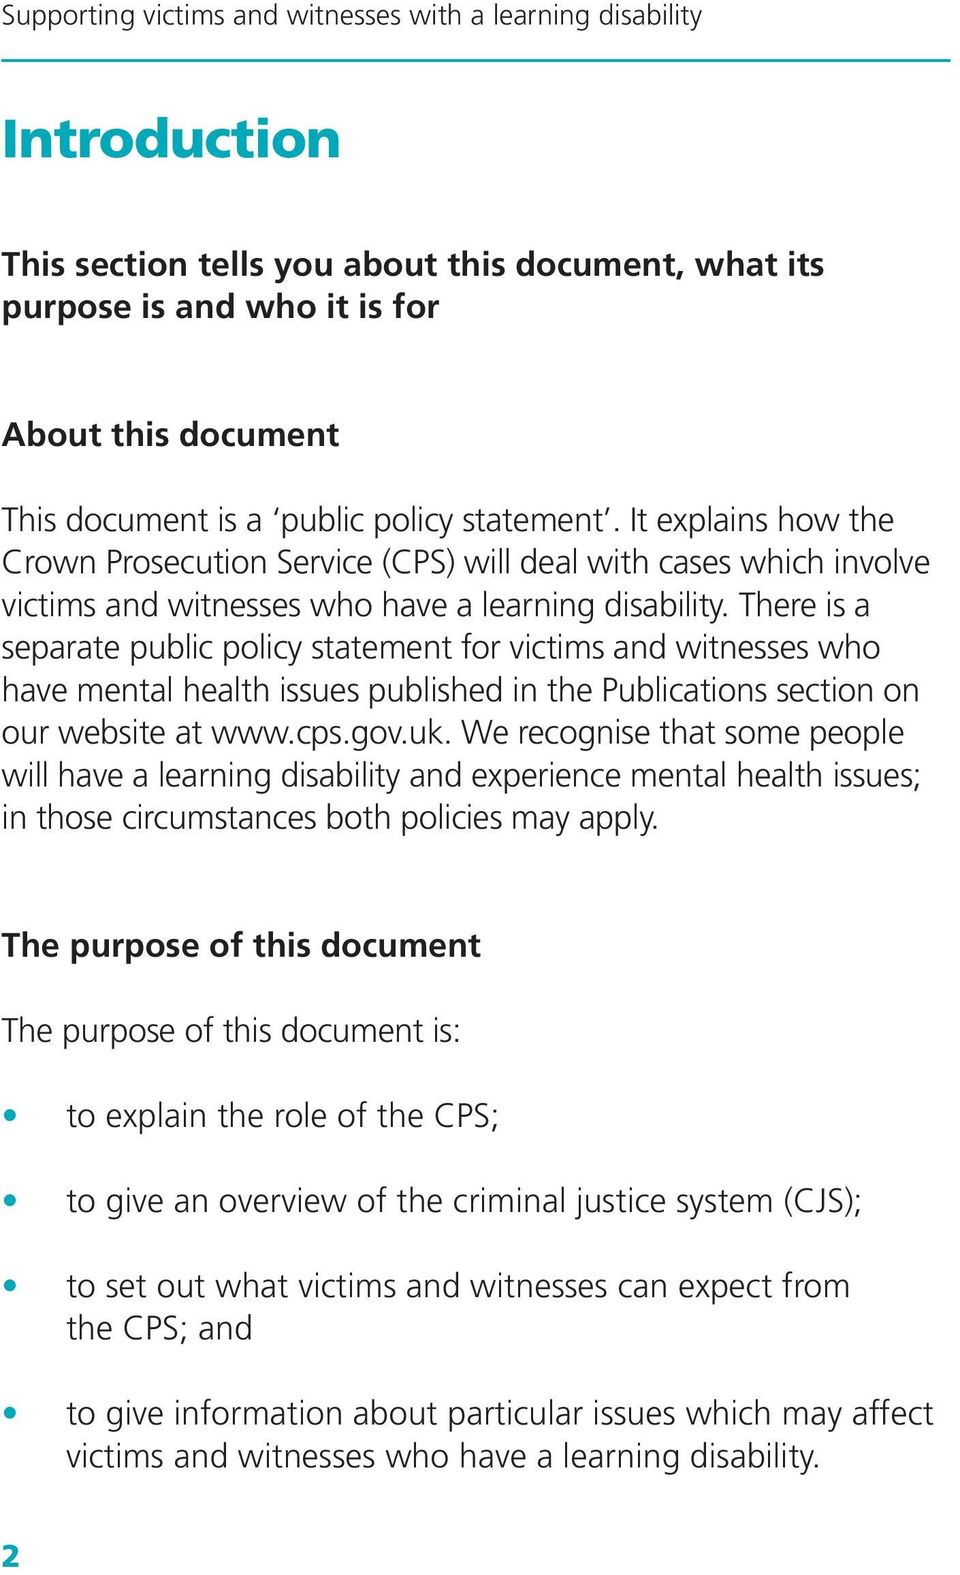 There is a separate public policy statement for victims and witnesses who have mental health issues published in the Publications section on our website at www.cps.gov.uk.